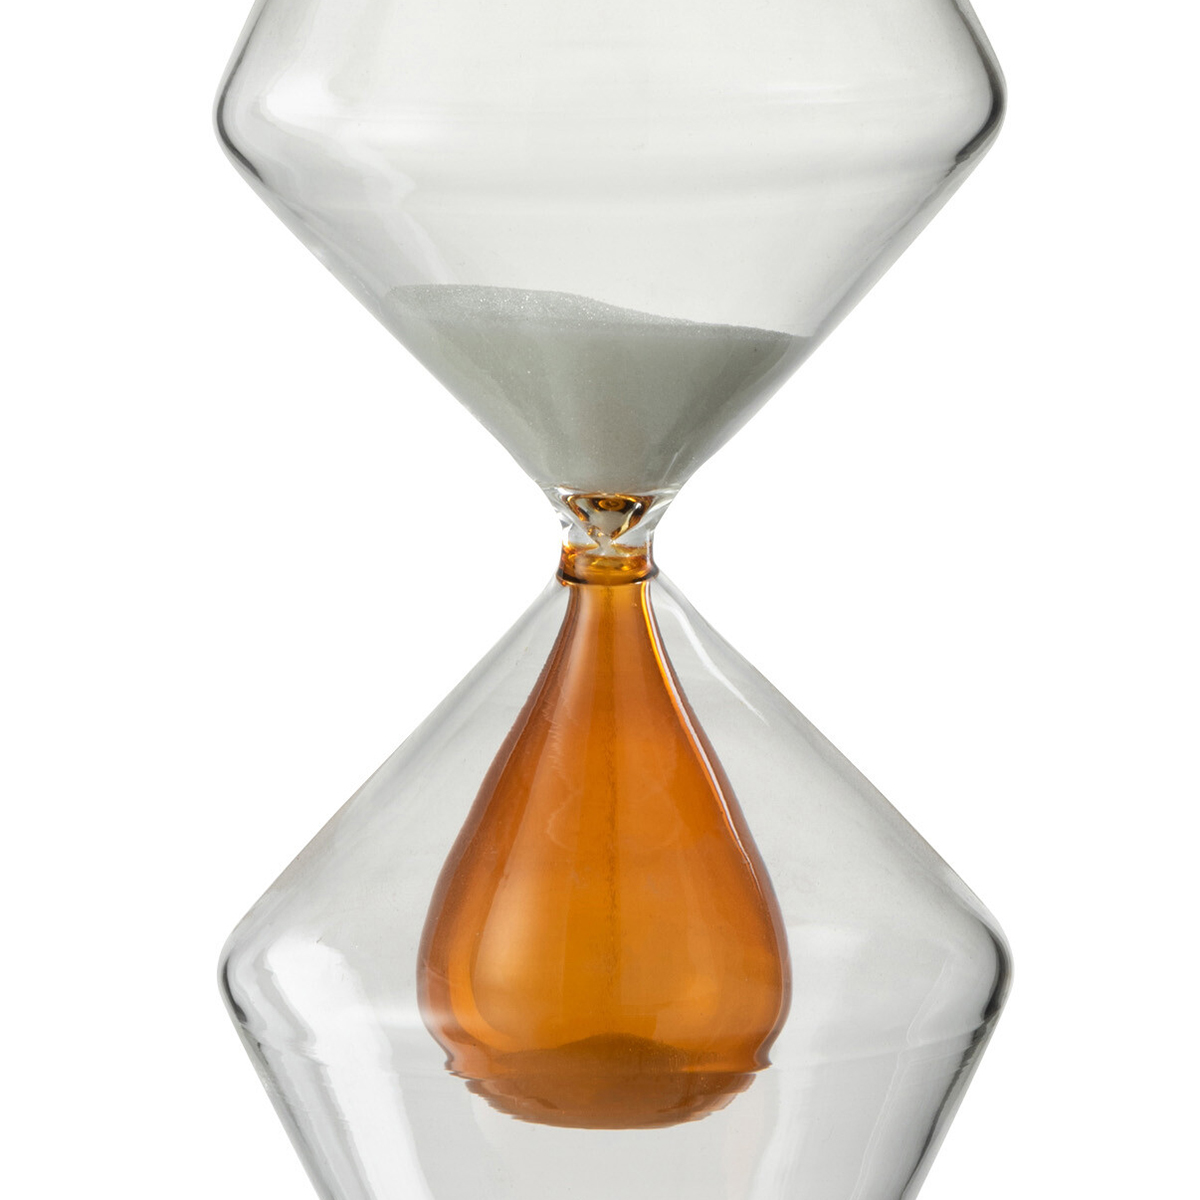 Decorative hourglass in ocher glass and white sand